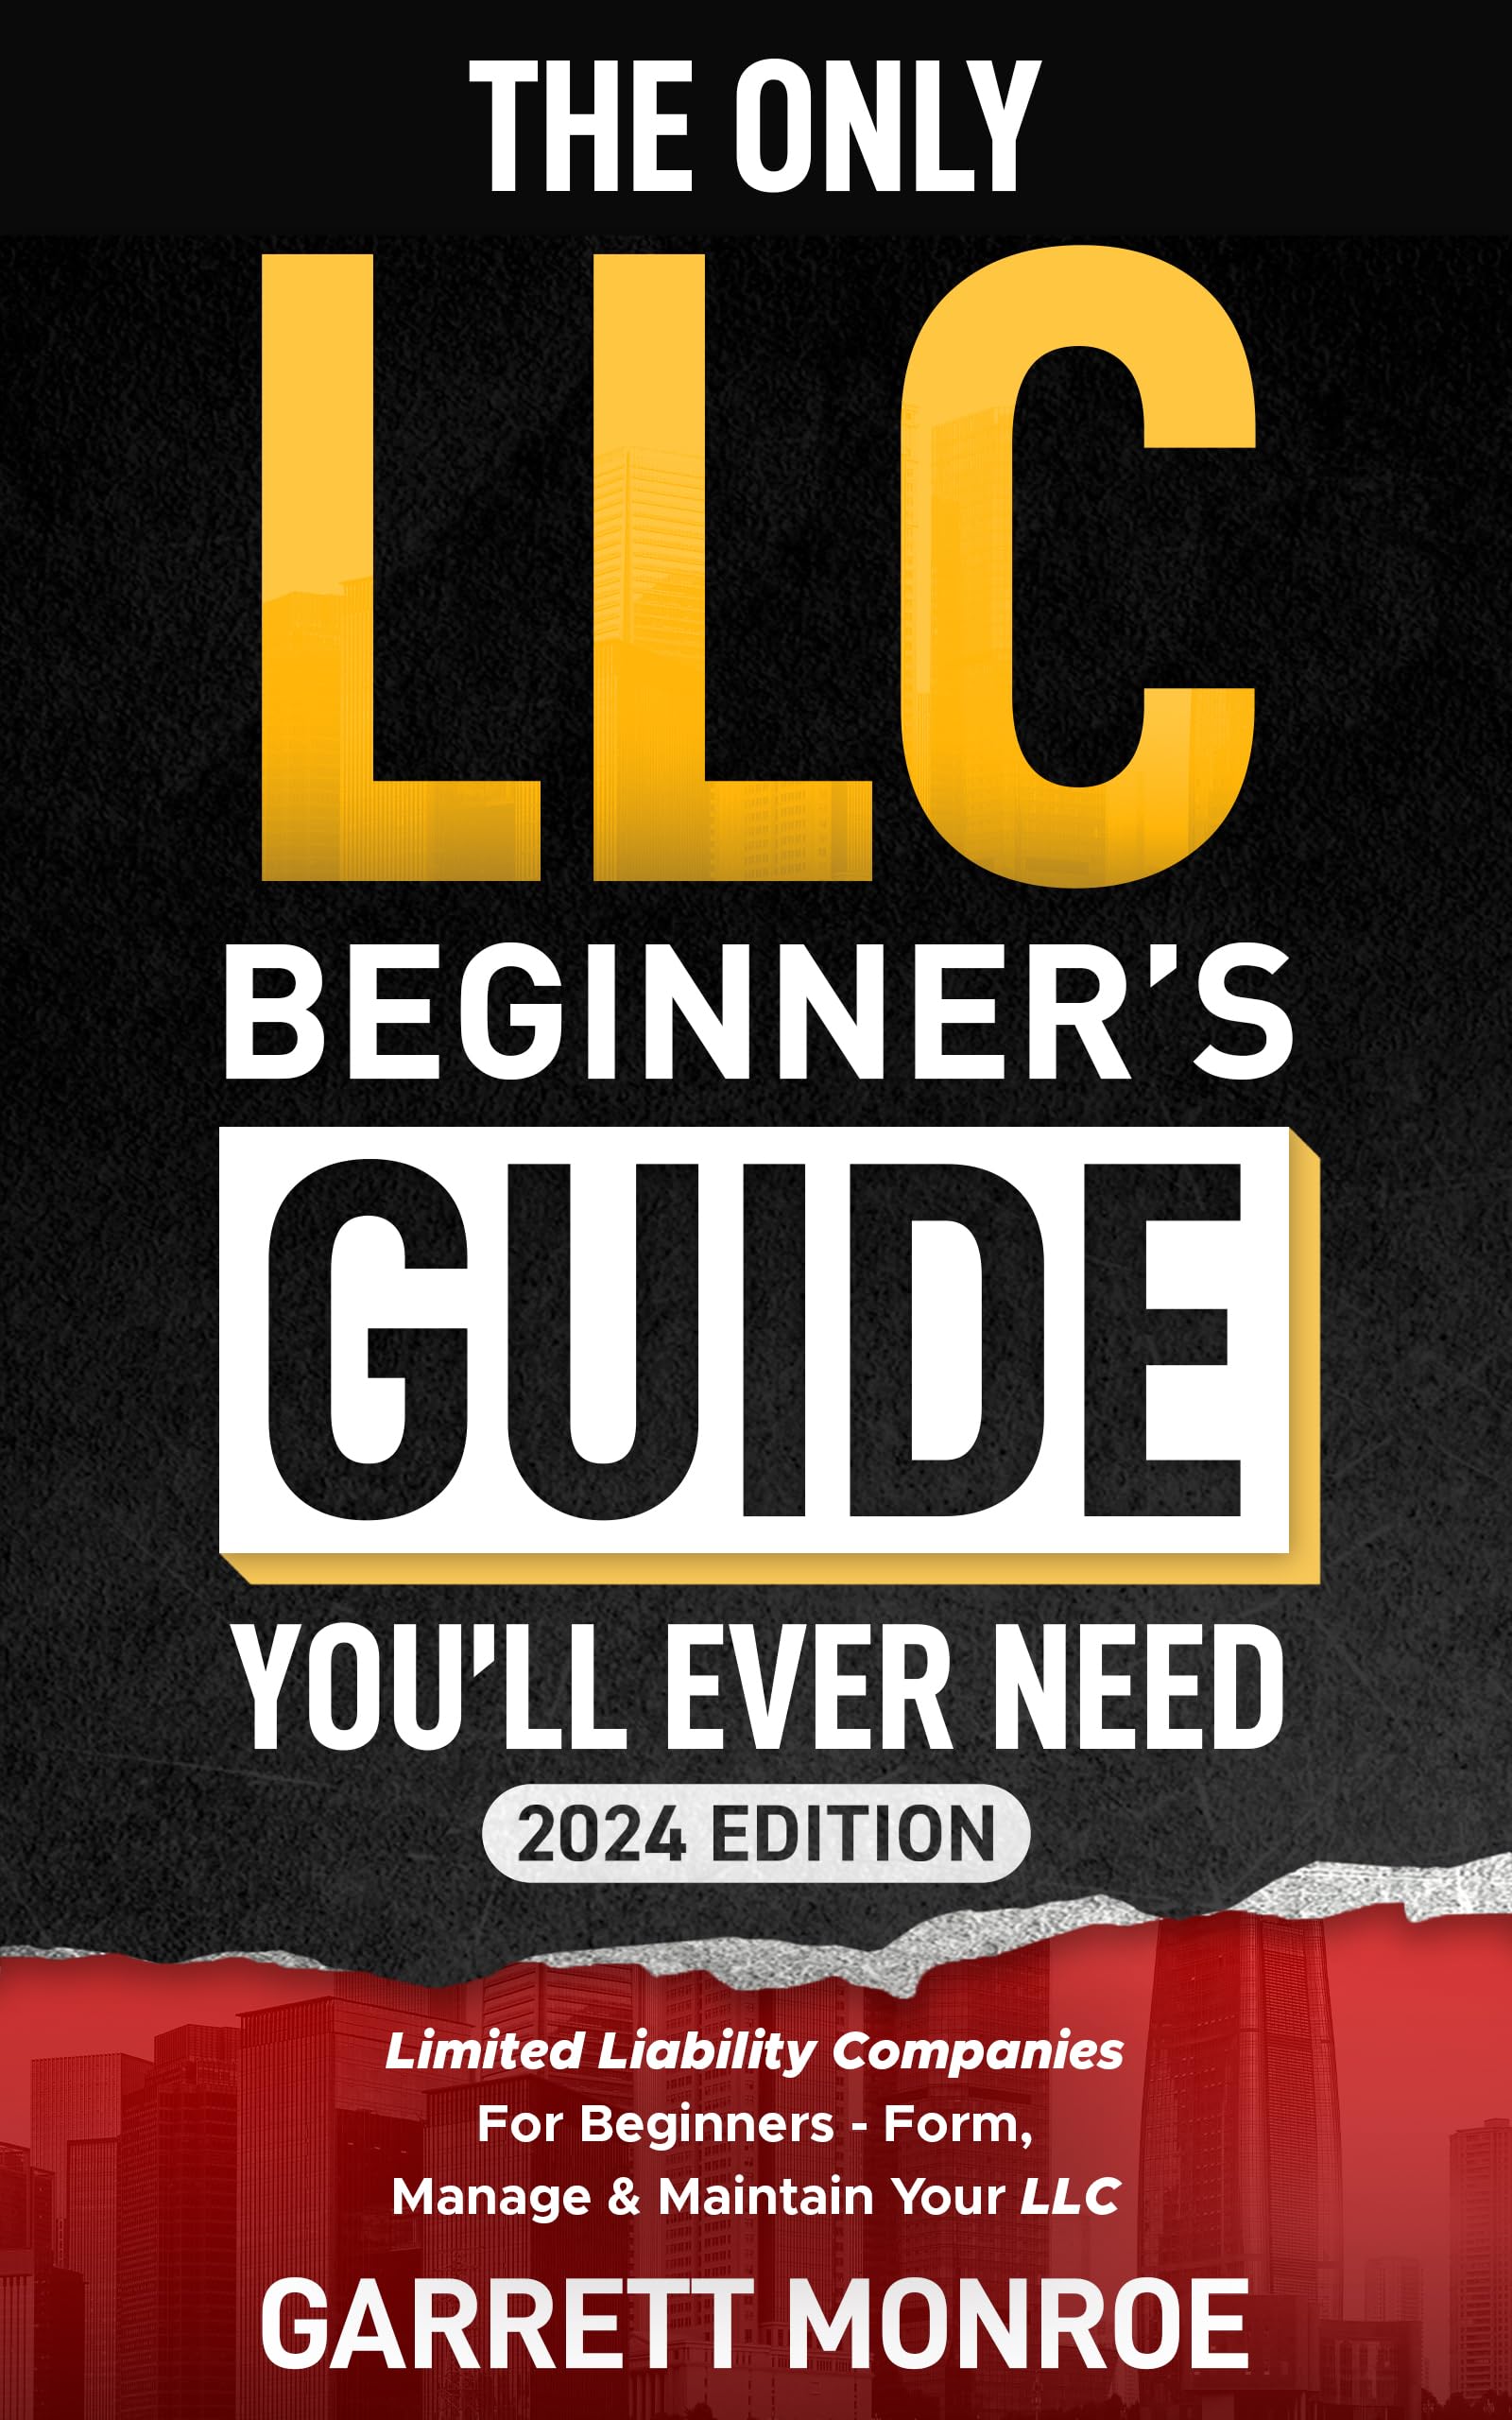 The Only LLC Beginners Guide You’ll Ever Need: Limited Liability Companies For Beginners - Form, Manage & Maintain Your LLC (Starting a Business Book)